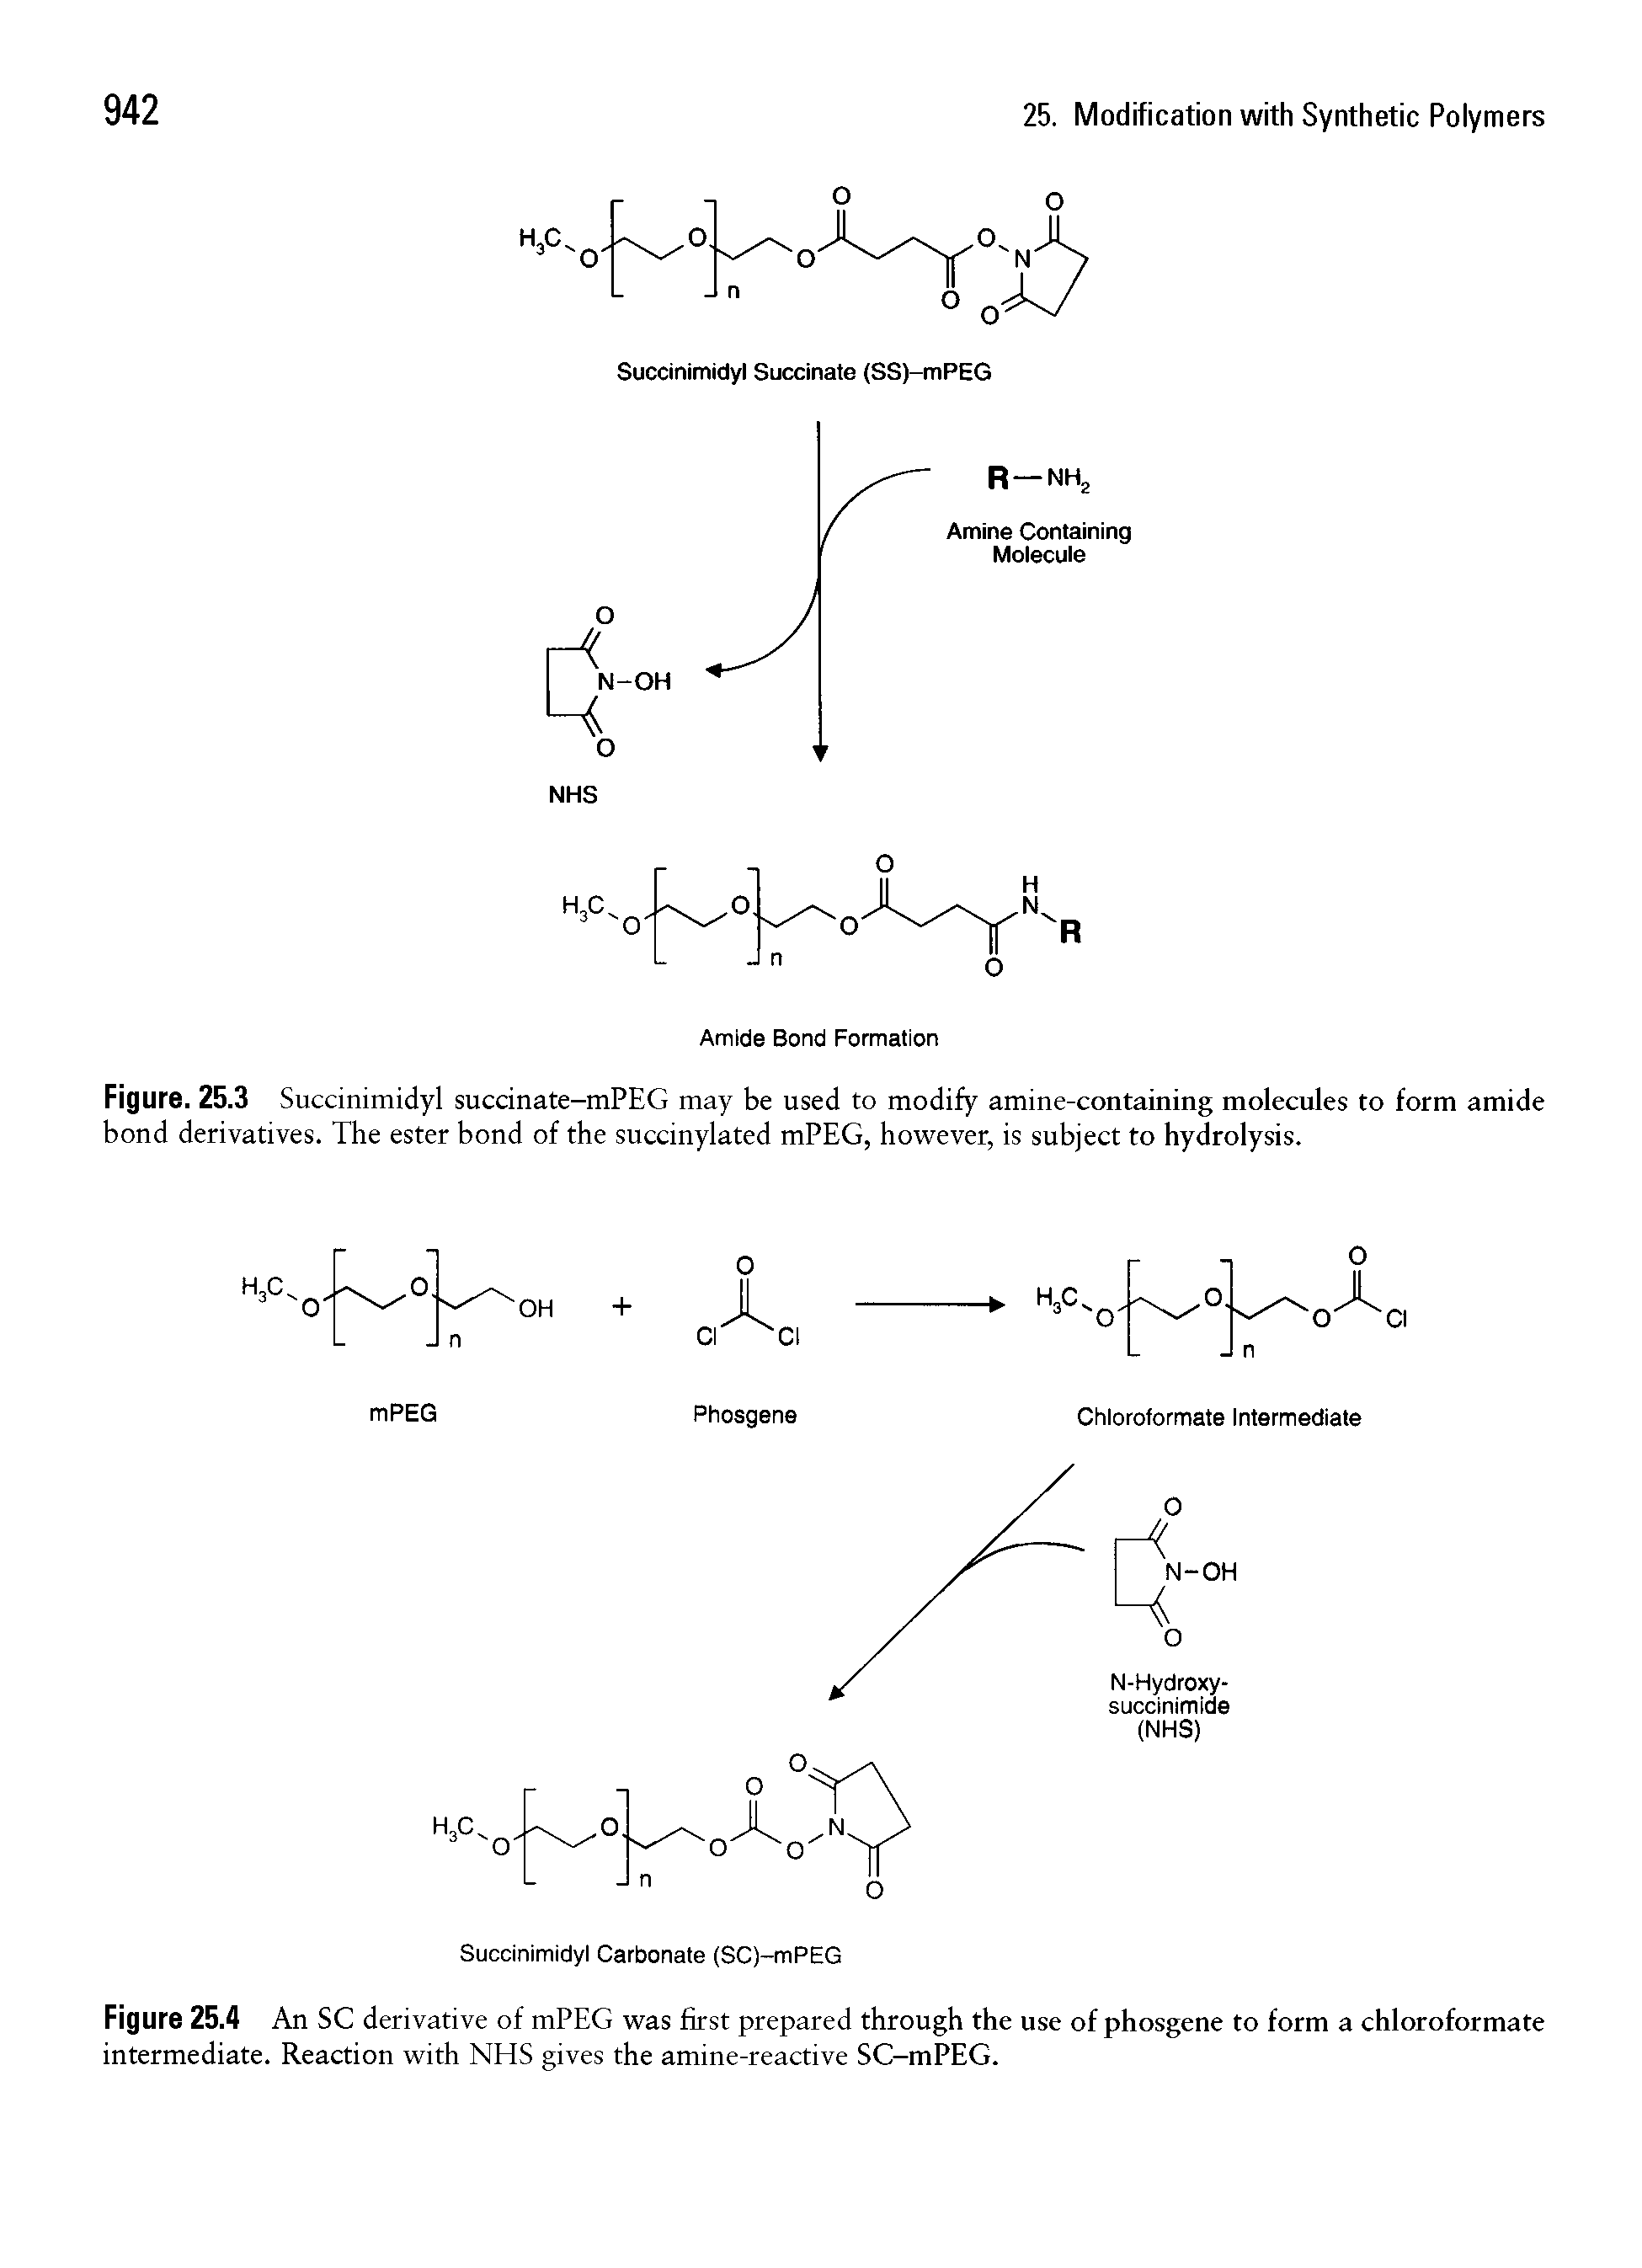 Figure. 25.3 Succinimidyl succinate-mPEG may be used to modify amine-containing molecules to form amide bond derivatives. The ester bond of the succinylated mPEG, however, is subject to hydrolysis.